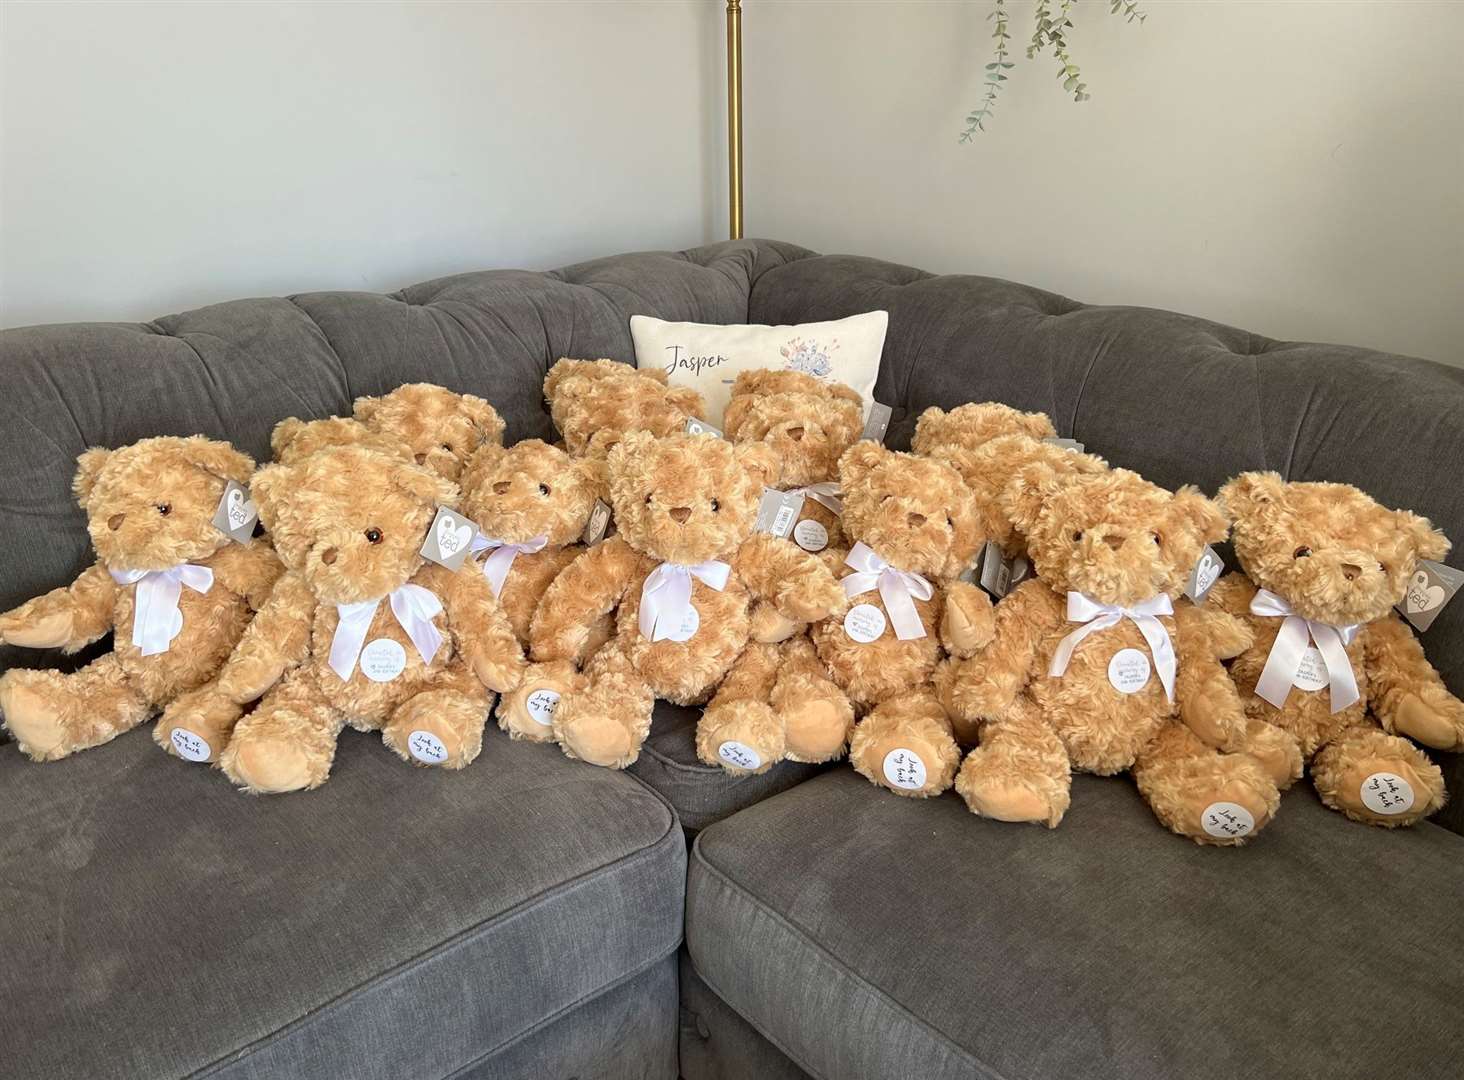 Fifteen memorial bears have been gifted by the couple